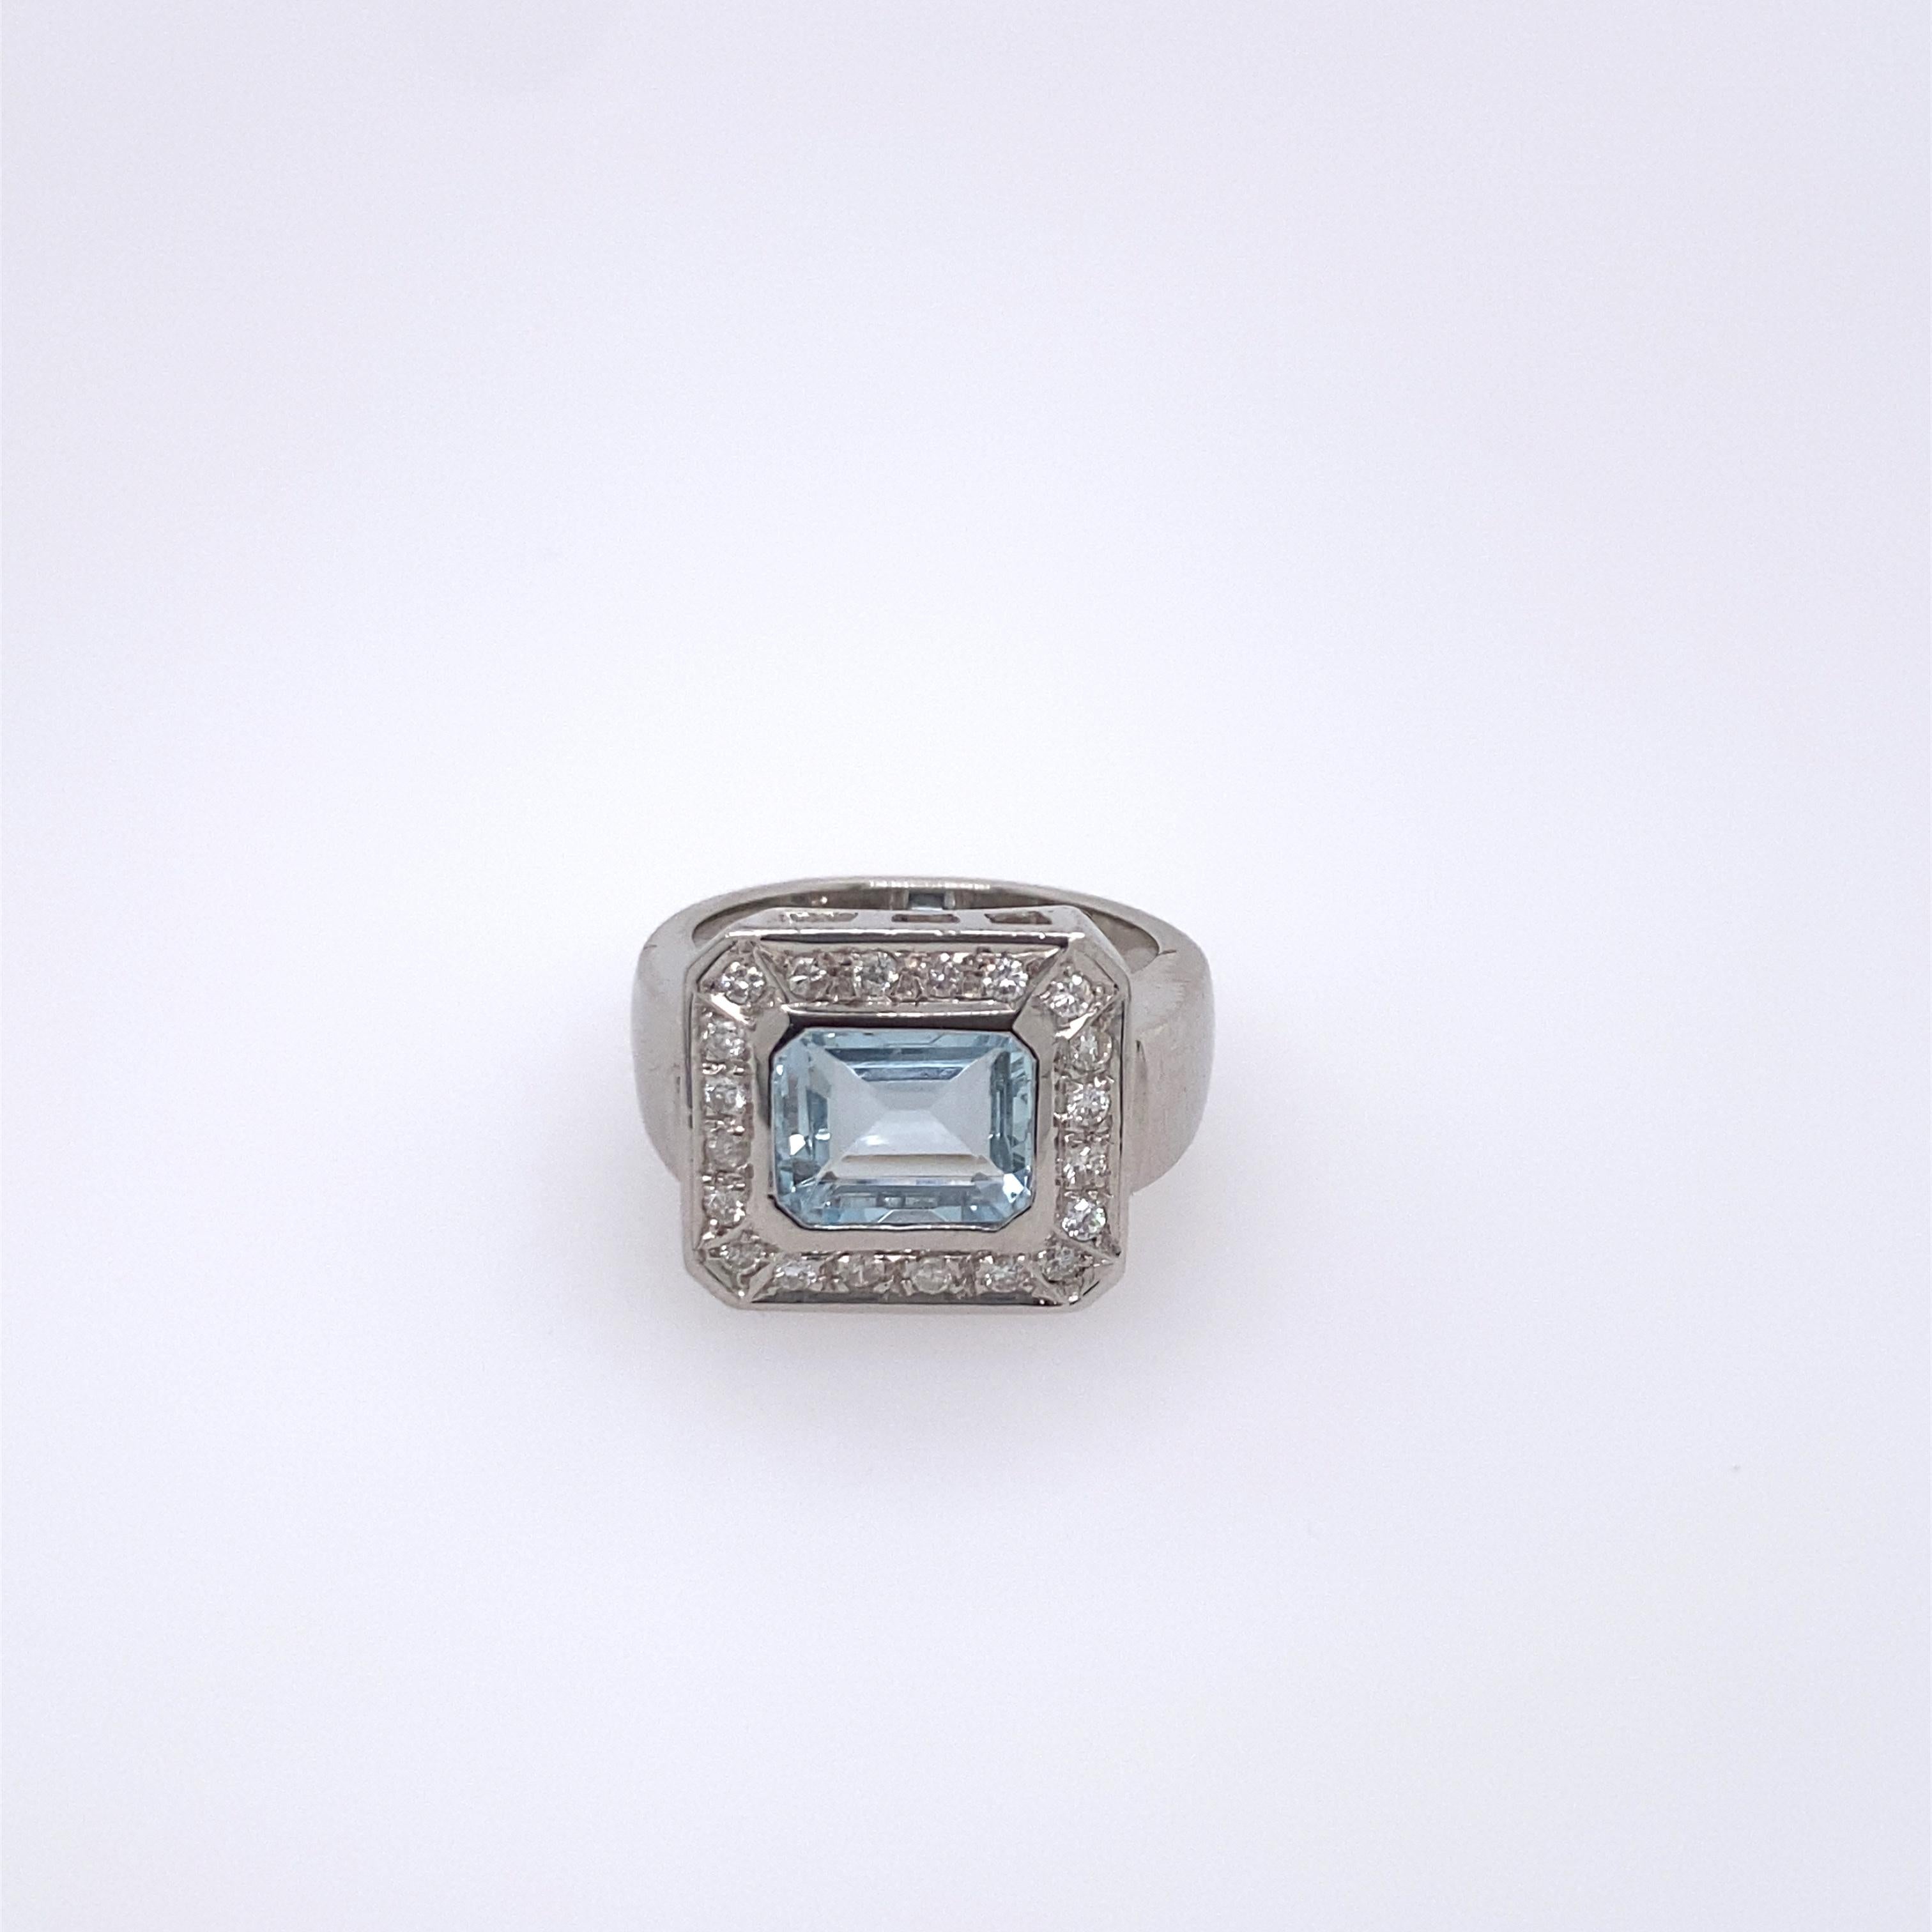 18k white gold ring with approx. 1.63ct aquamarine (measures 8.7 x 6.9 x 3.96mm) surrounded with approx. 0.24ctw in diamonds. Ring size - 7, ring top - 14mm x 15.5mm. Marked 750. Weight - 8.9 grams. 5.72 dwt 